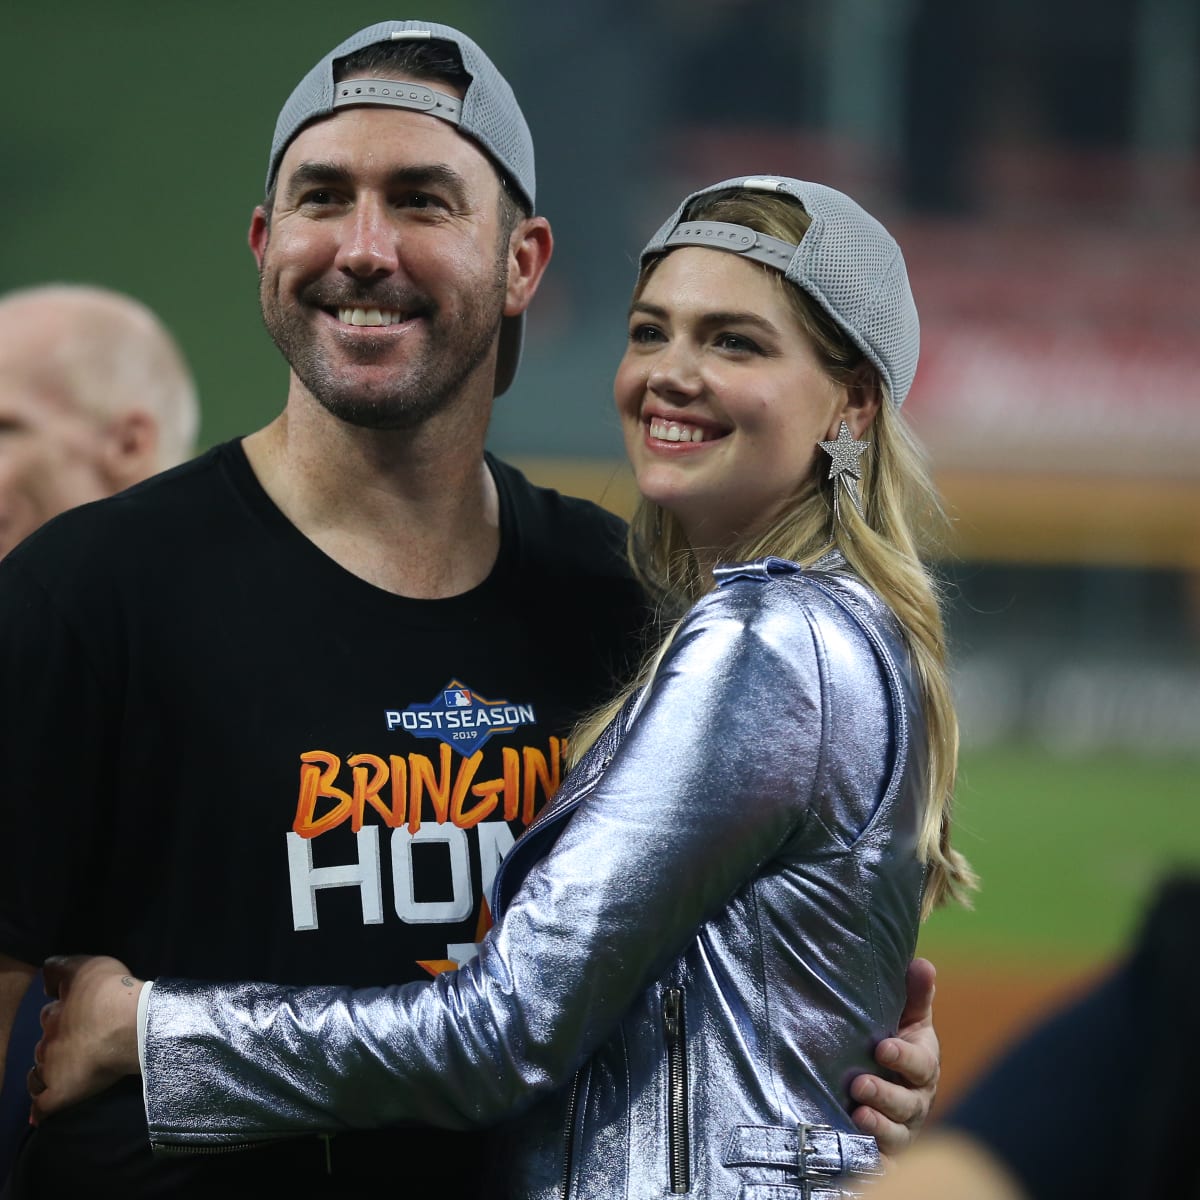 Custom jean jacket trend grows as Kate Upton shows up to Astros